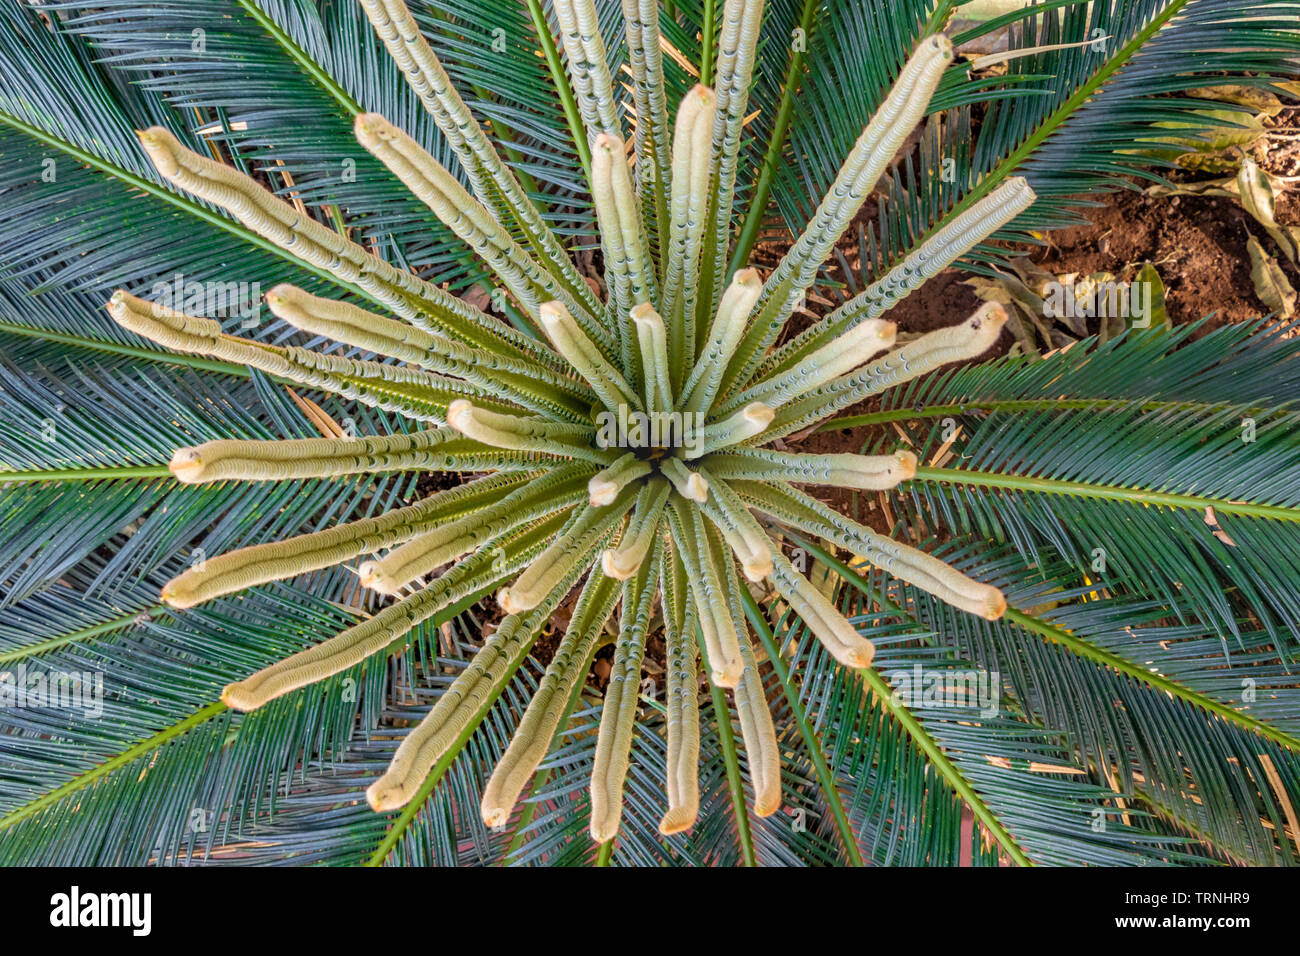 SAGO Palm, Cycas plant bud cones converting into new leafs. Stock Photo